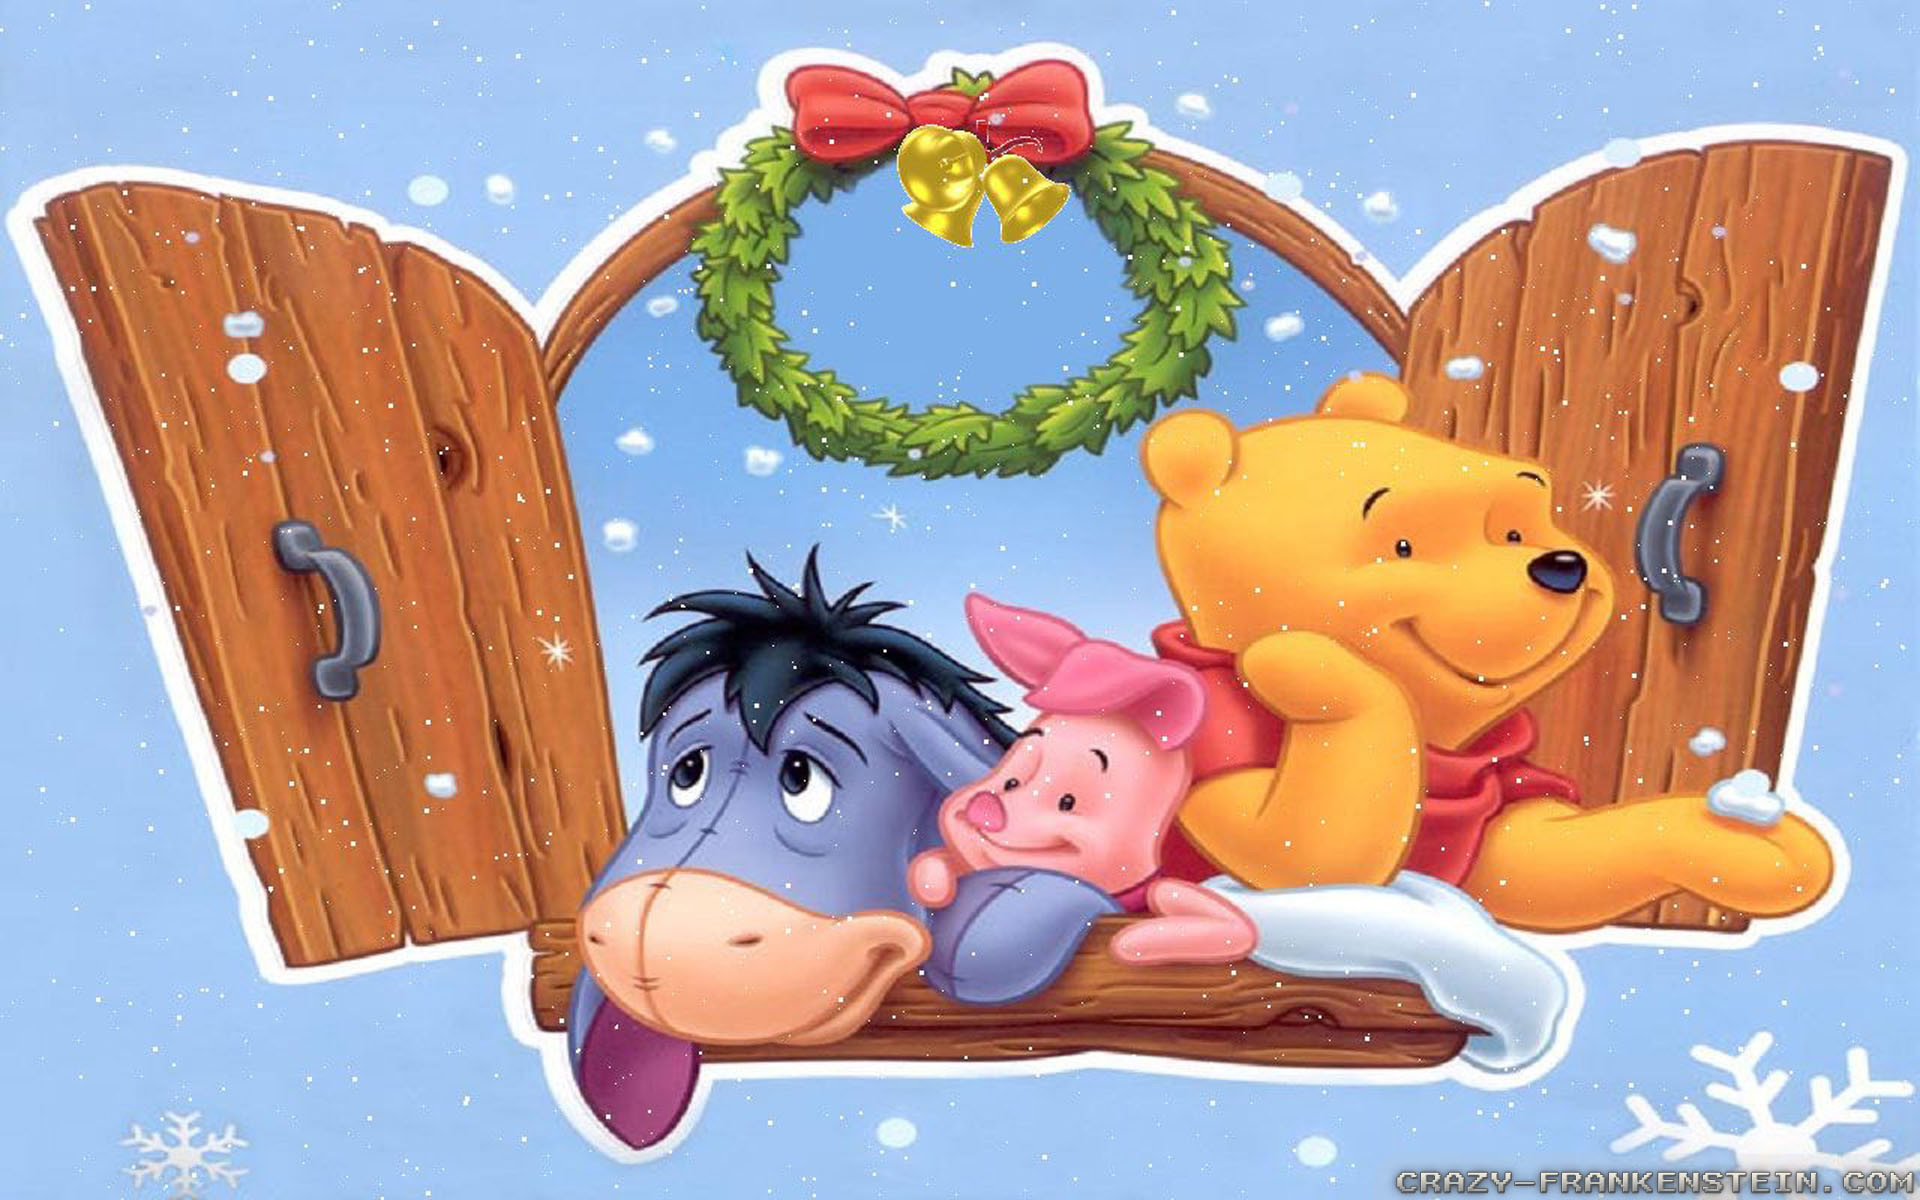 1920x1200 Wallpaper: Winnie the pooh Christmas wallpapers 3. Resolution: 1024x768 |  1280x1024 | 1600x1200. Widescreen Res: 1440x900 | 1680x1050 | 